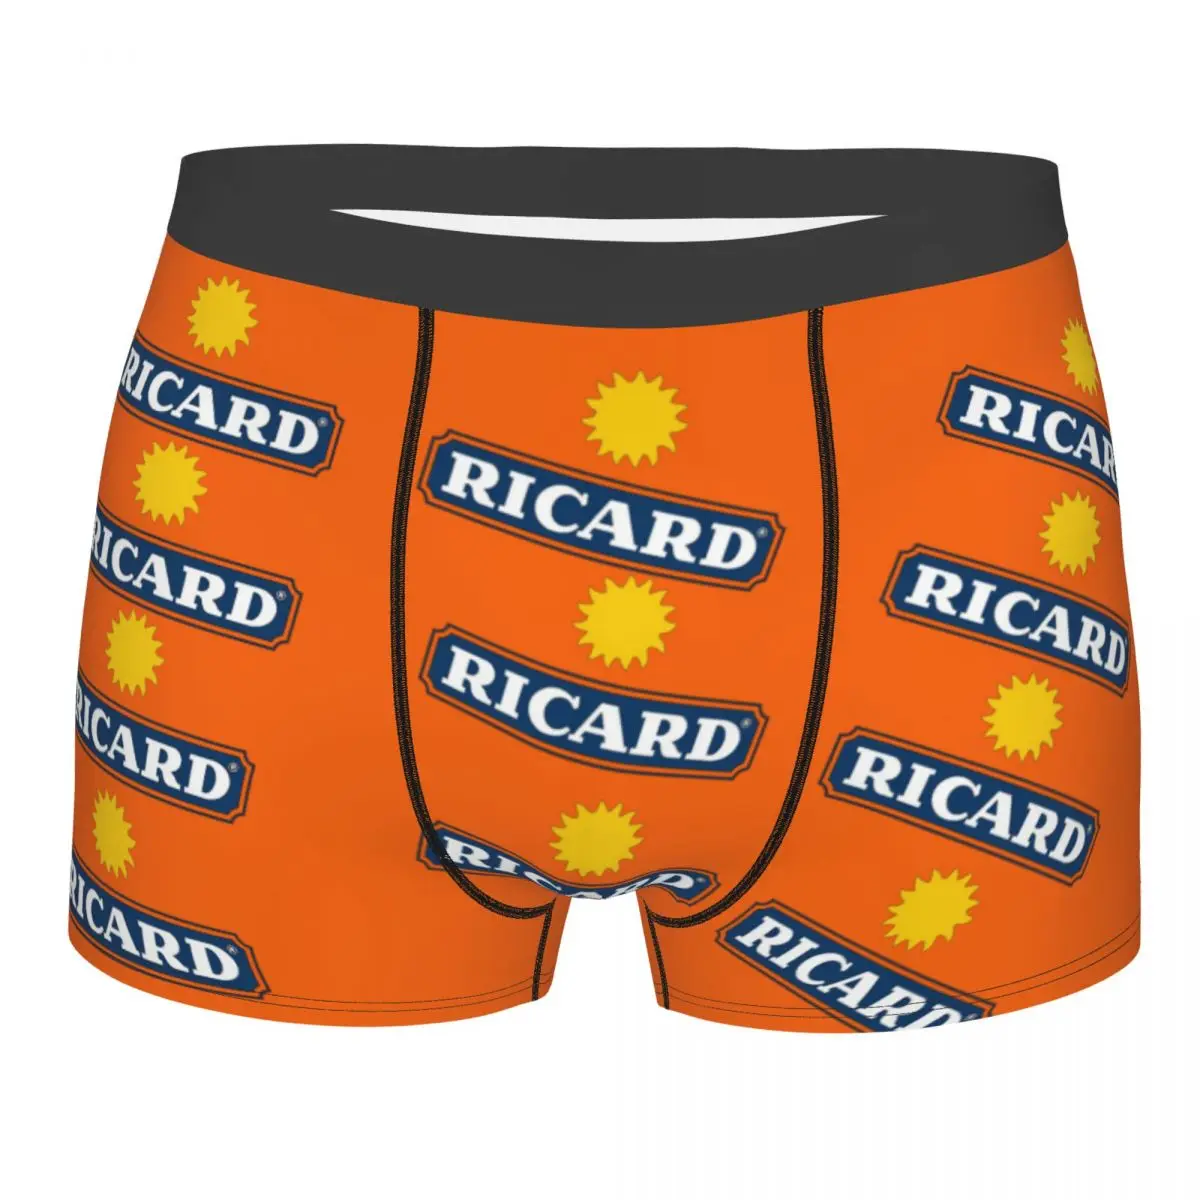 

The Duckling Ricard Who Was Now Men's Boxer Briefs, Ricards Highly Breathable Underpants Top Quality Print Shorts Gift Idea